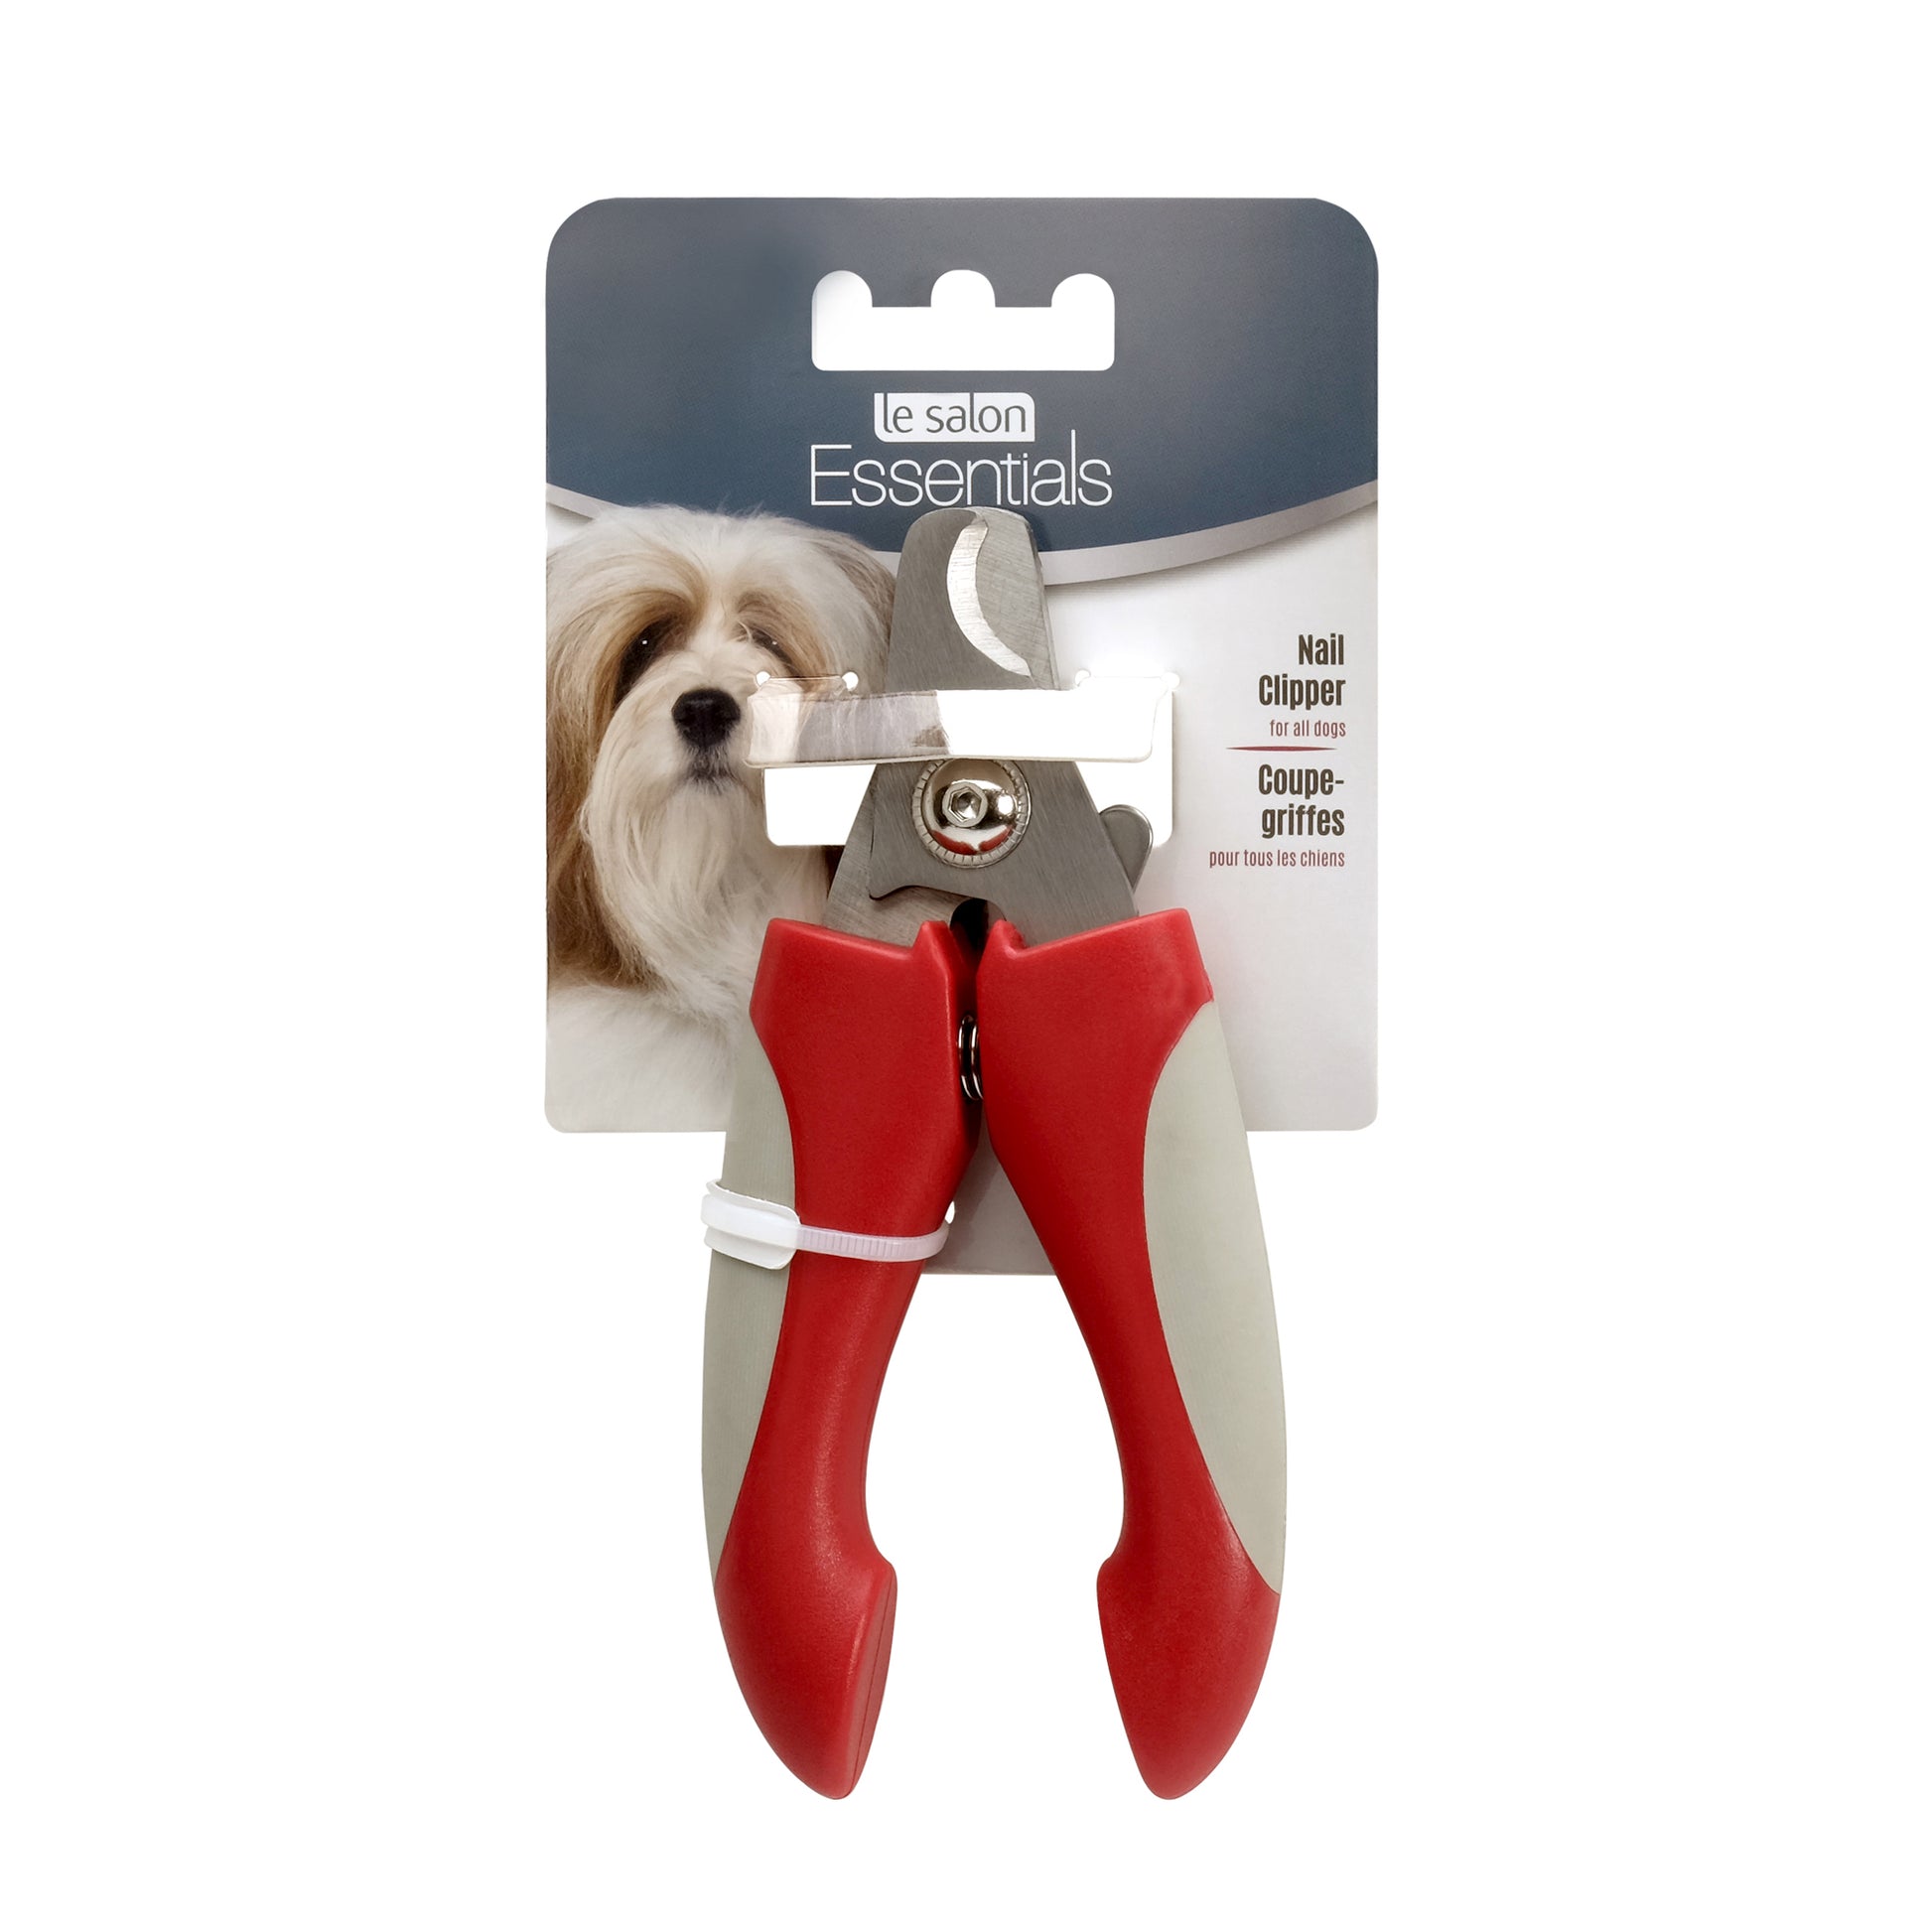 Le Salon Essentials Nail Clipper For Dogs  Grooming  | PetMax Canada